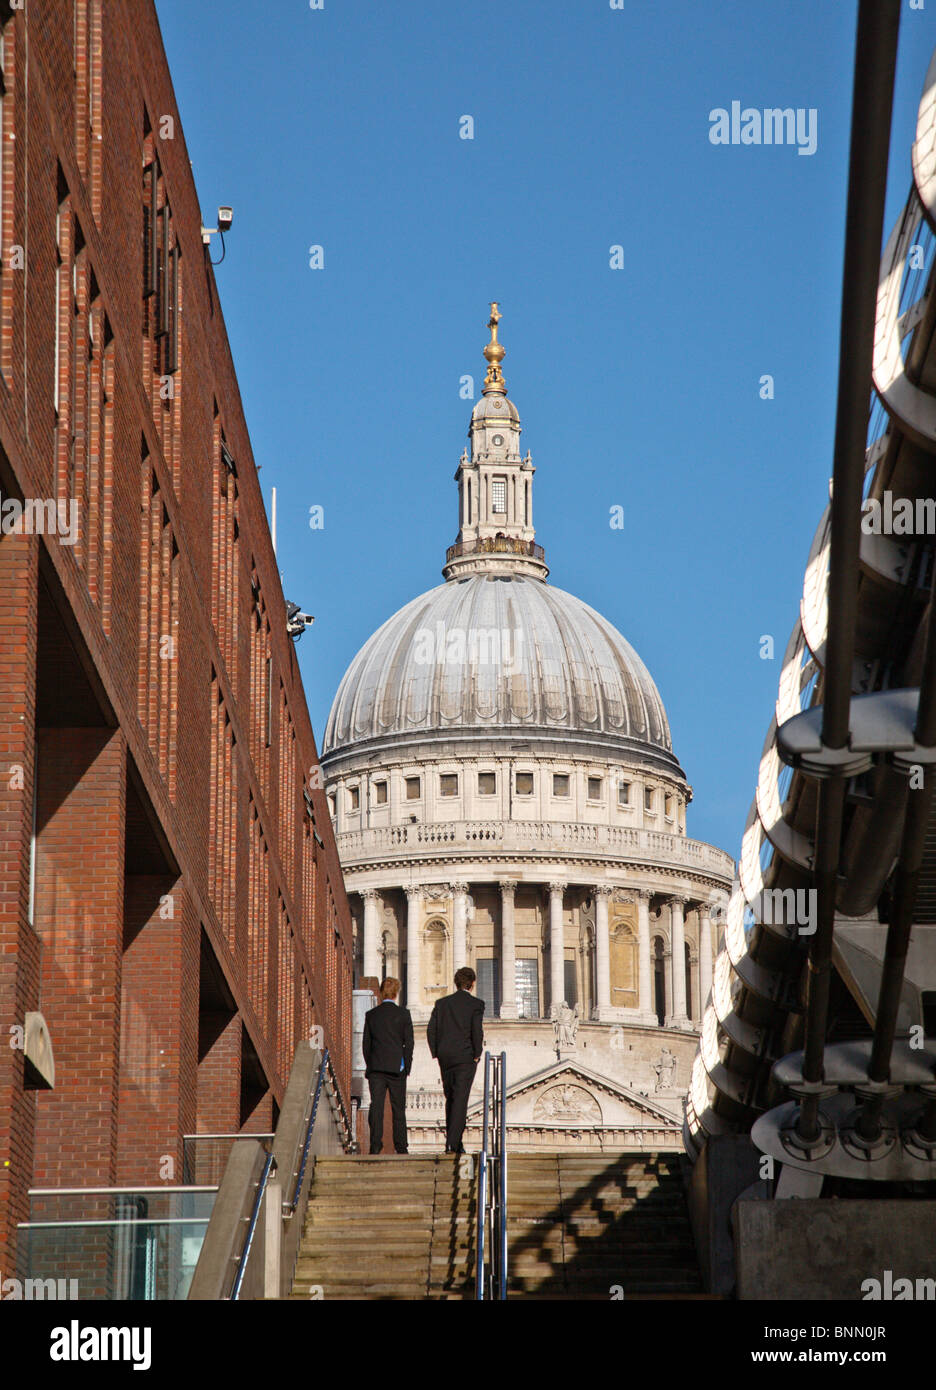 Two men in suits walk towards St. Paul's Cathedral Stock Photo